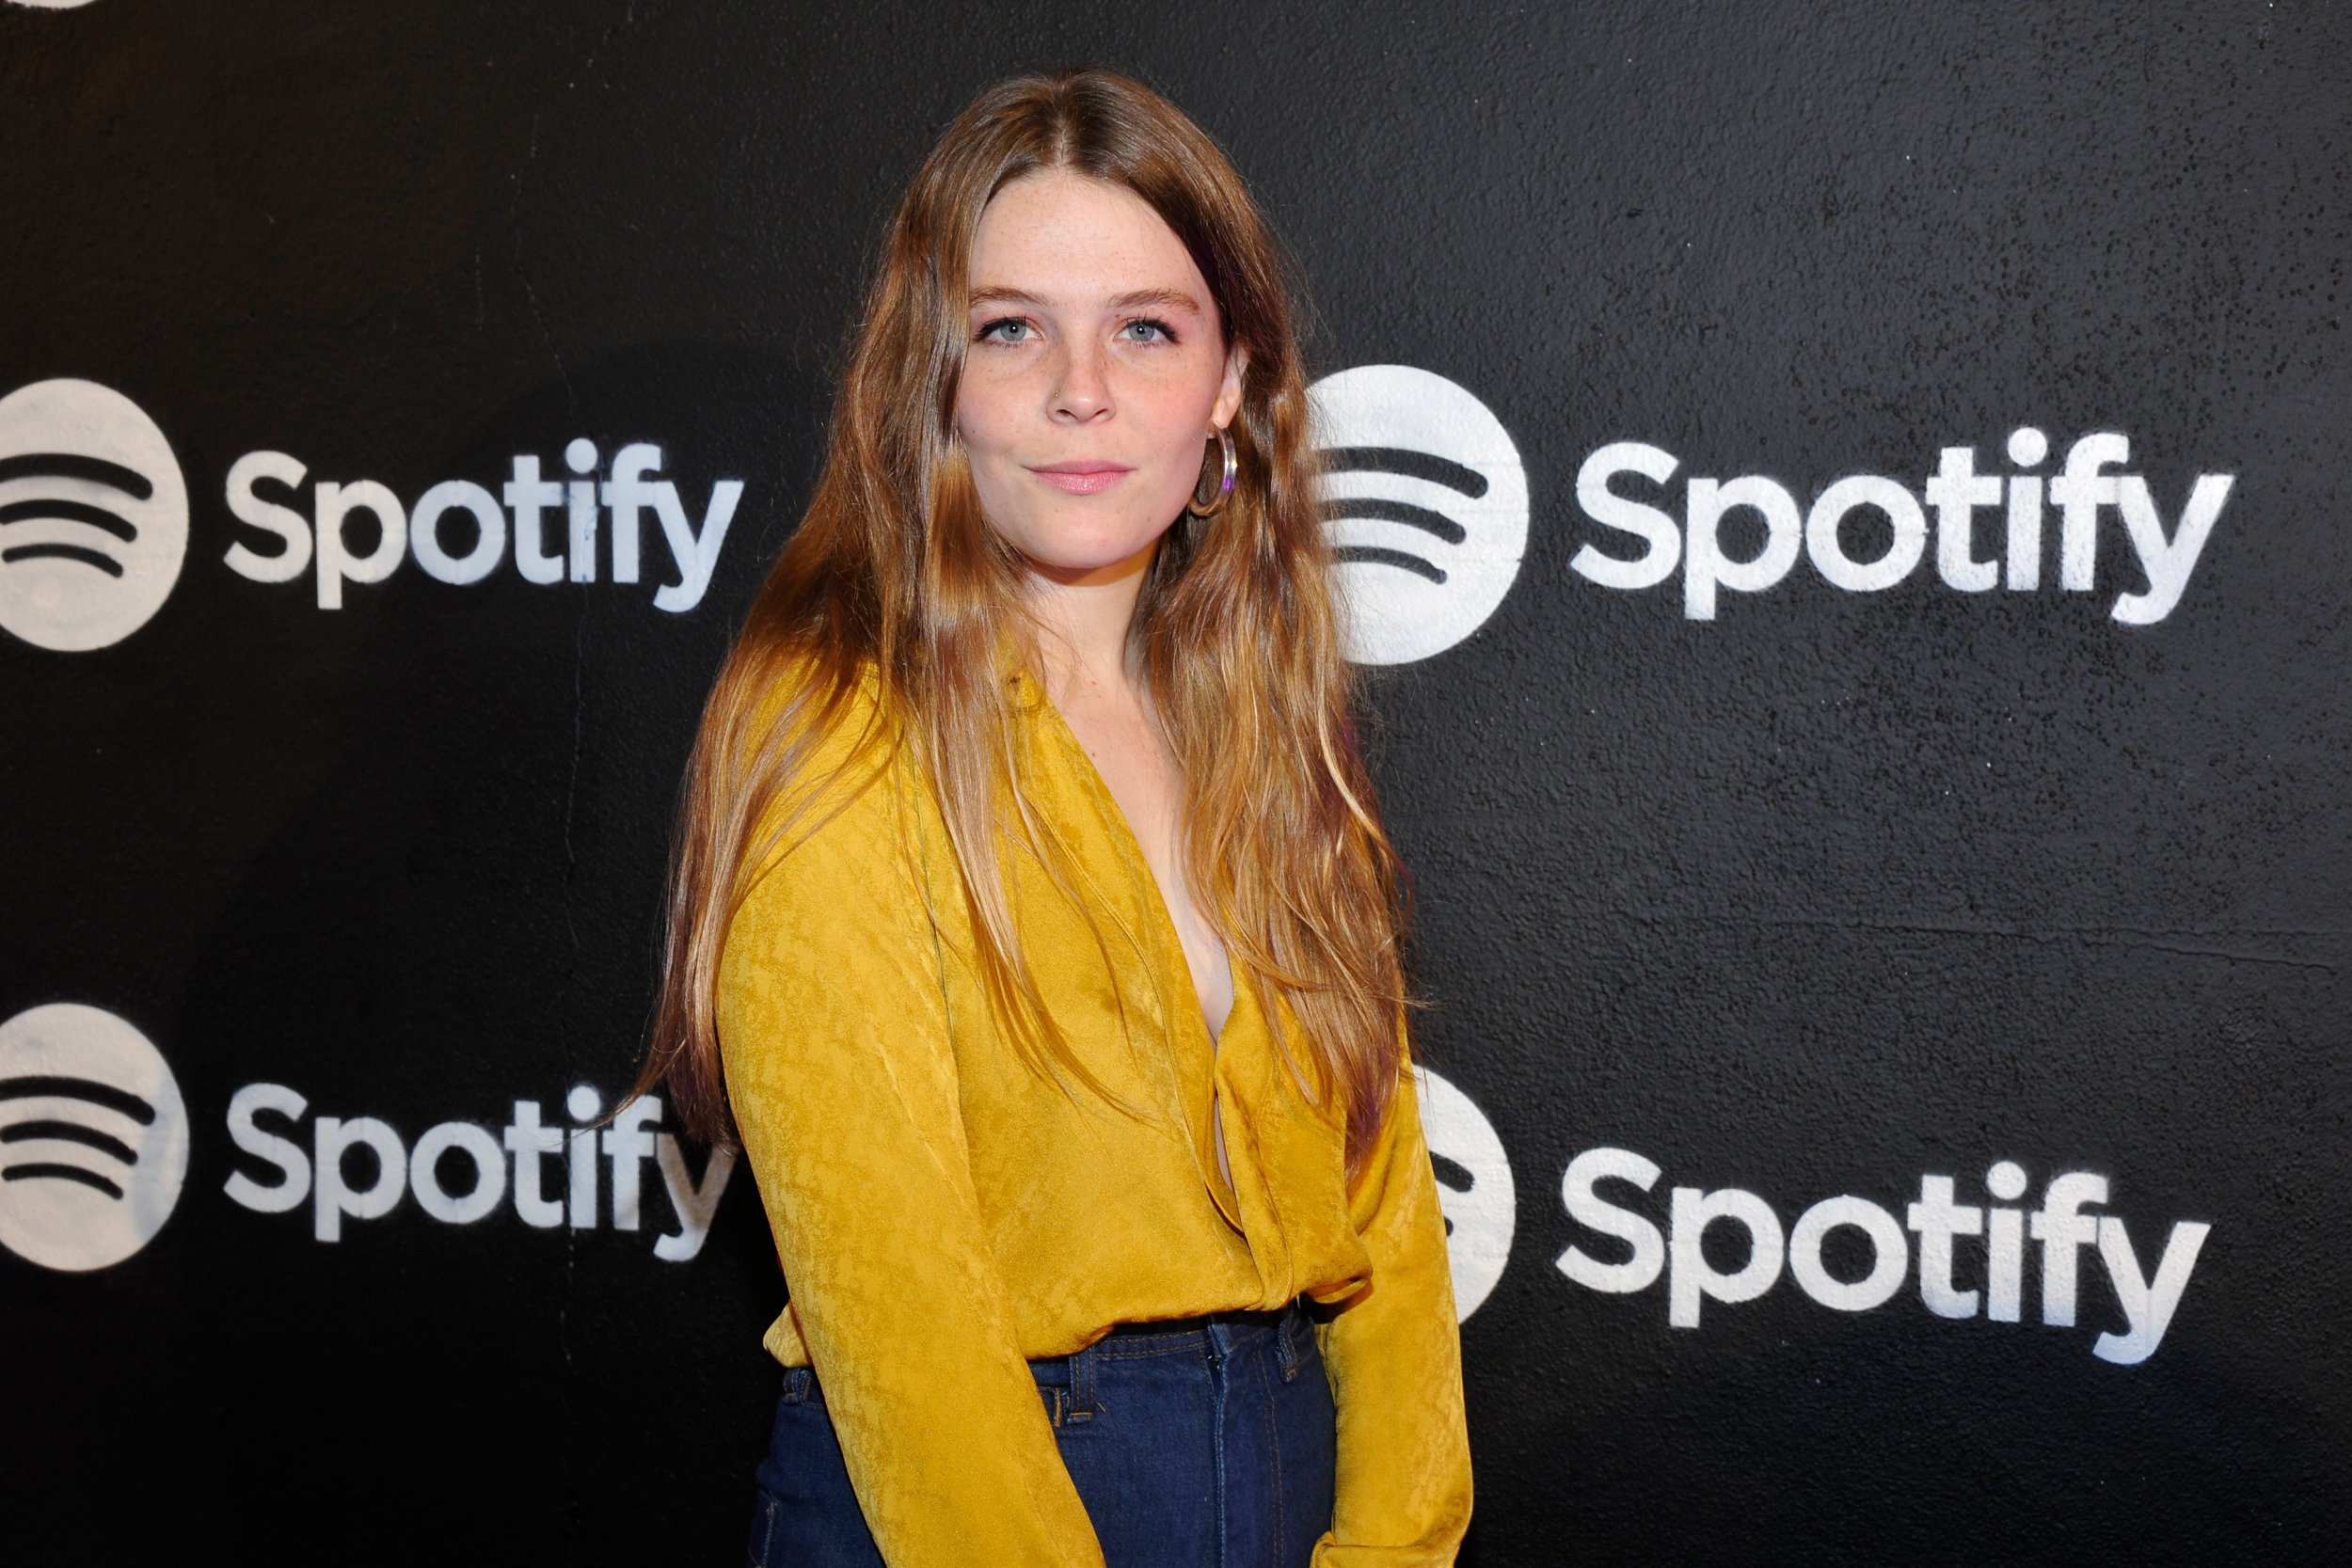 Singer Maggie Rogers attends the Spotify Best New Artist Nominees celebrati...